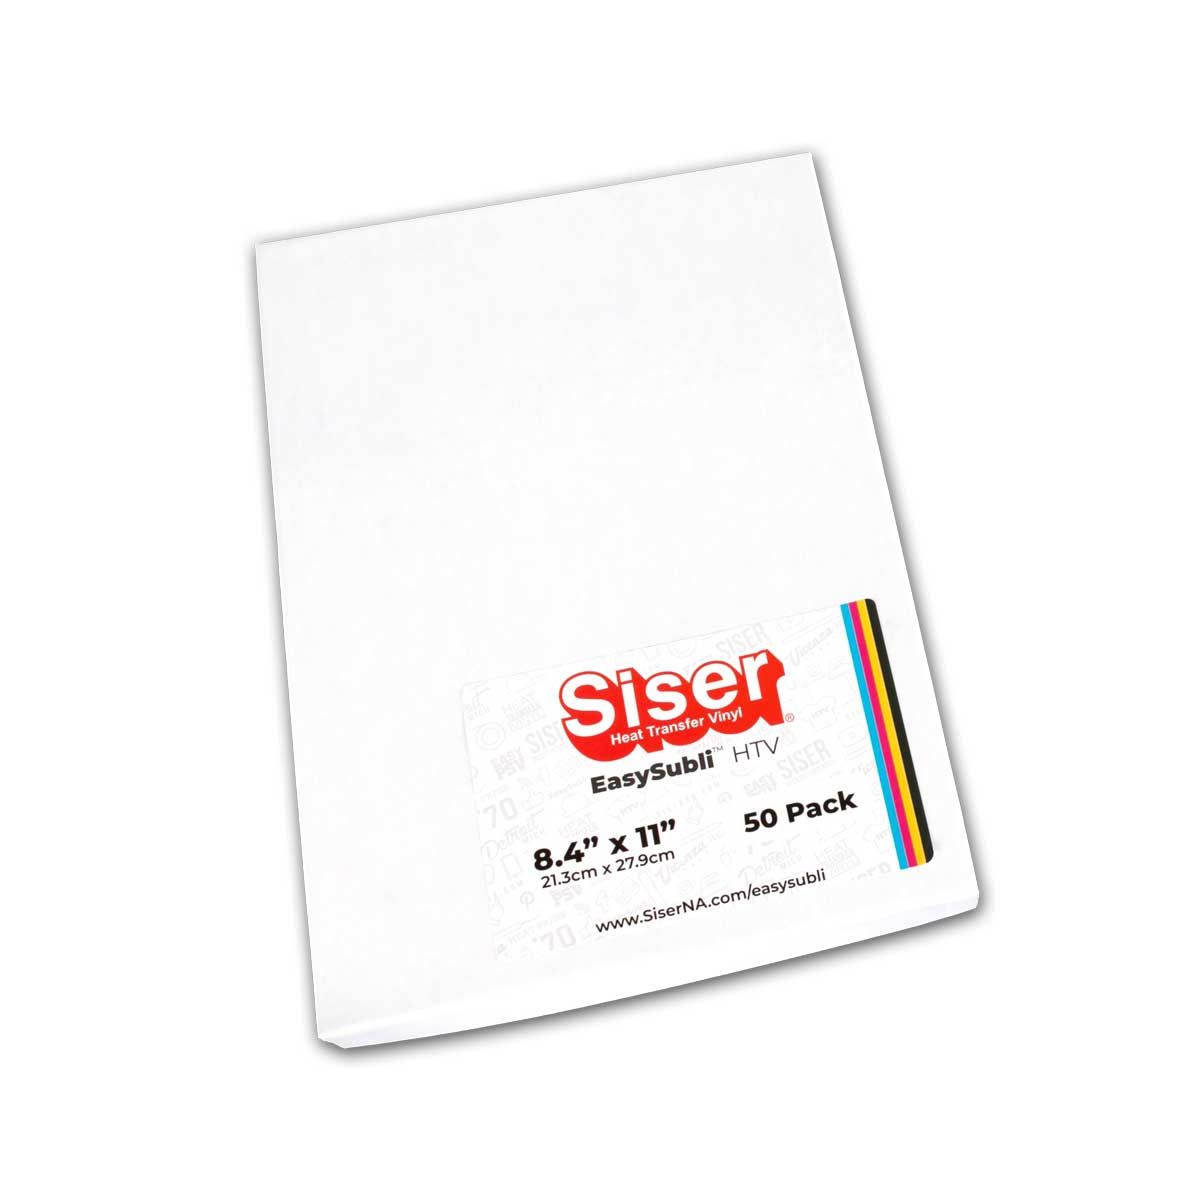 EasySubli Sublimation Opaque Paper by Siser, Sublimation to cotton